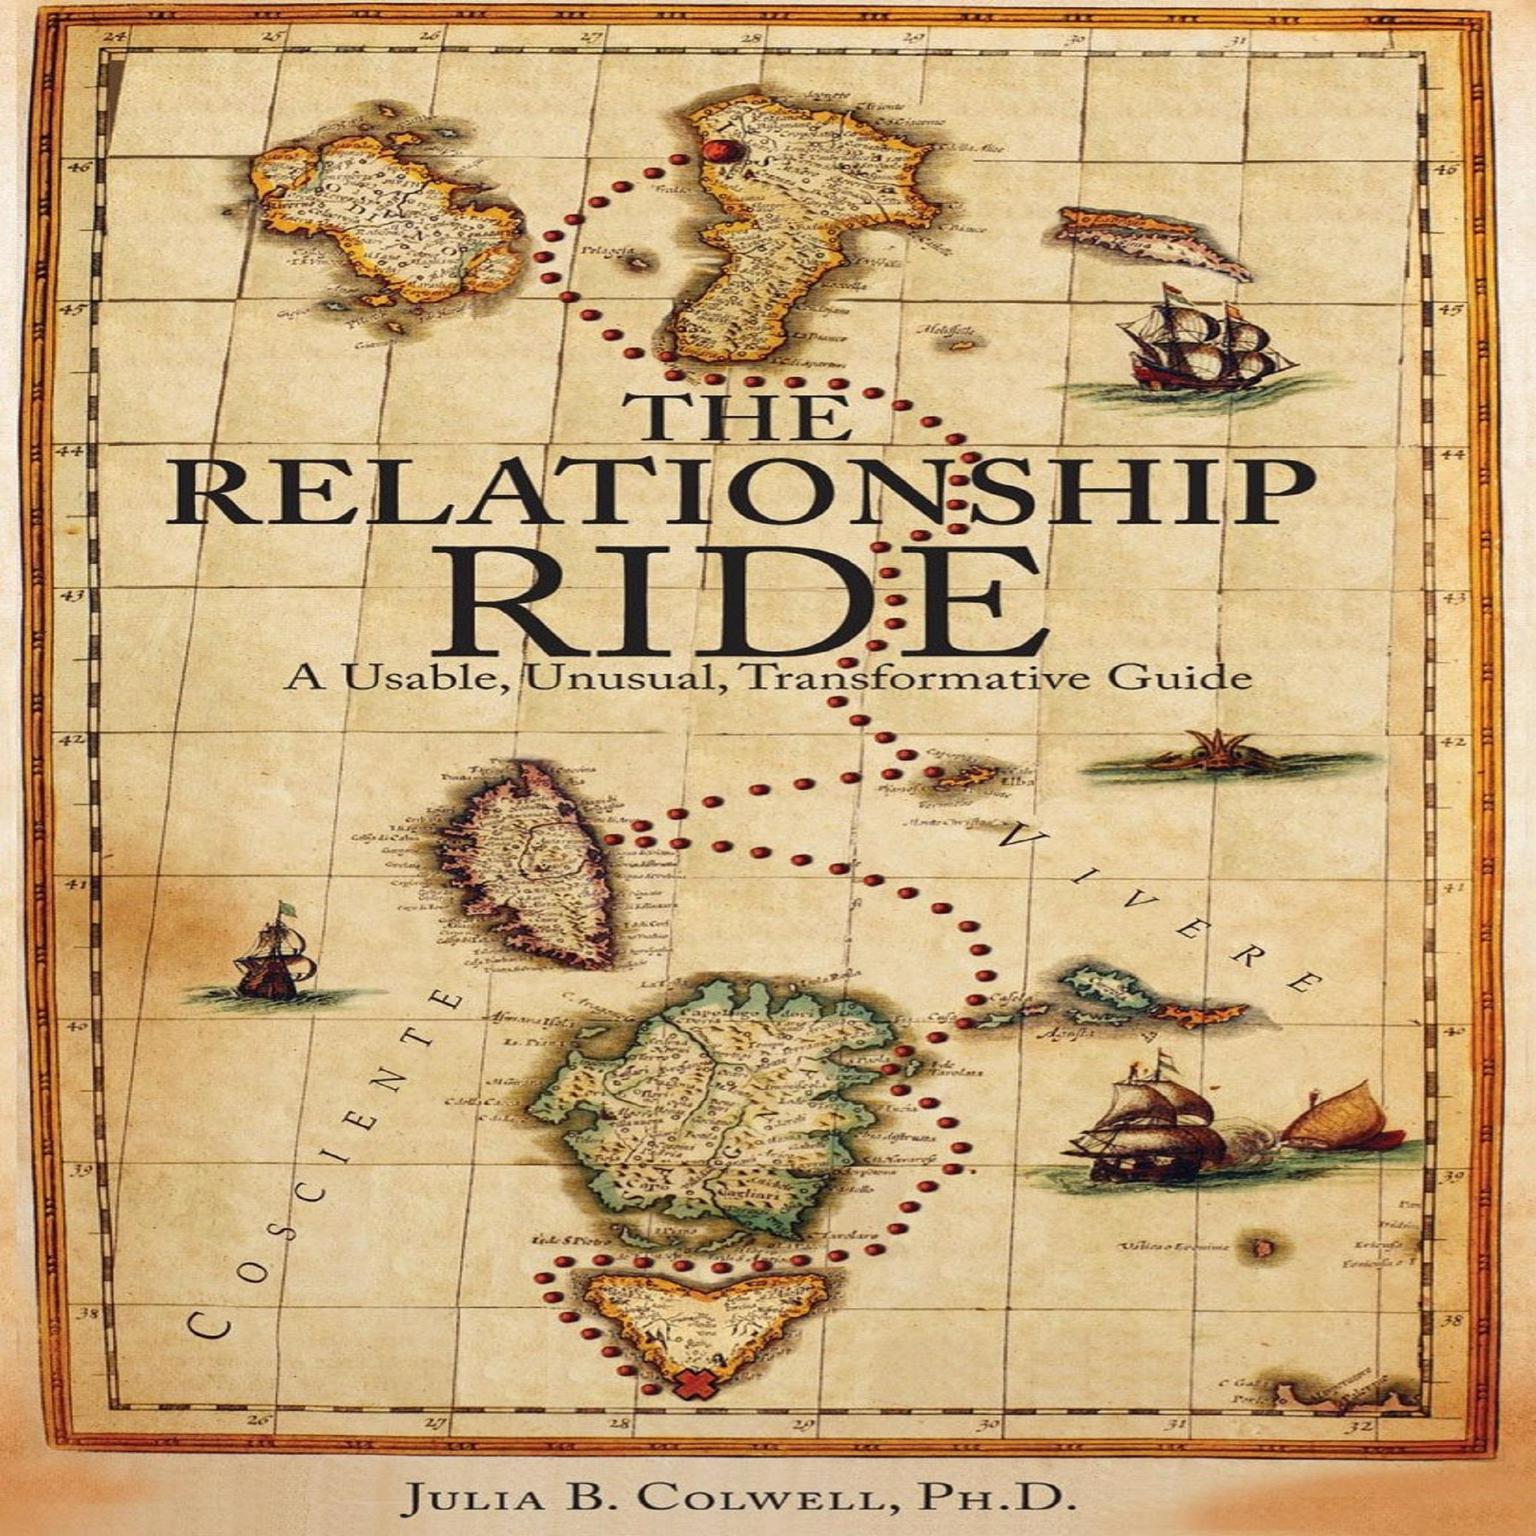 The Relationship Ride: A Usable, Unusual, Transformative Guide Audiobook, by Julia B. Colwell